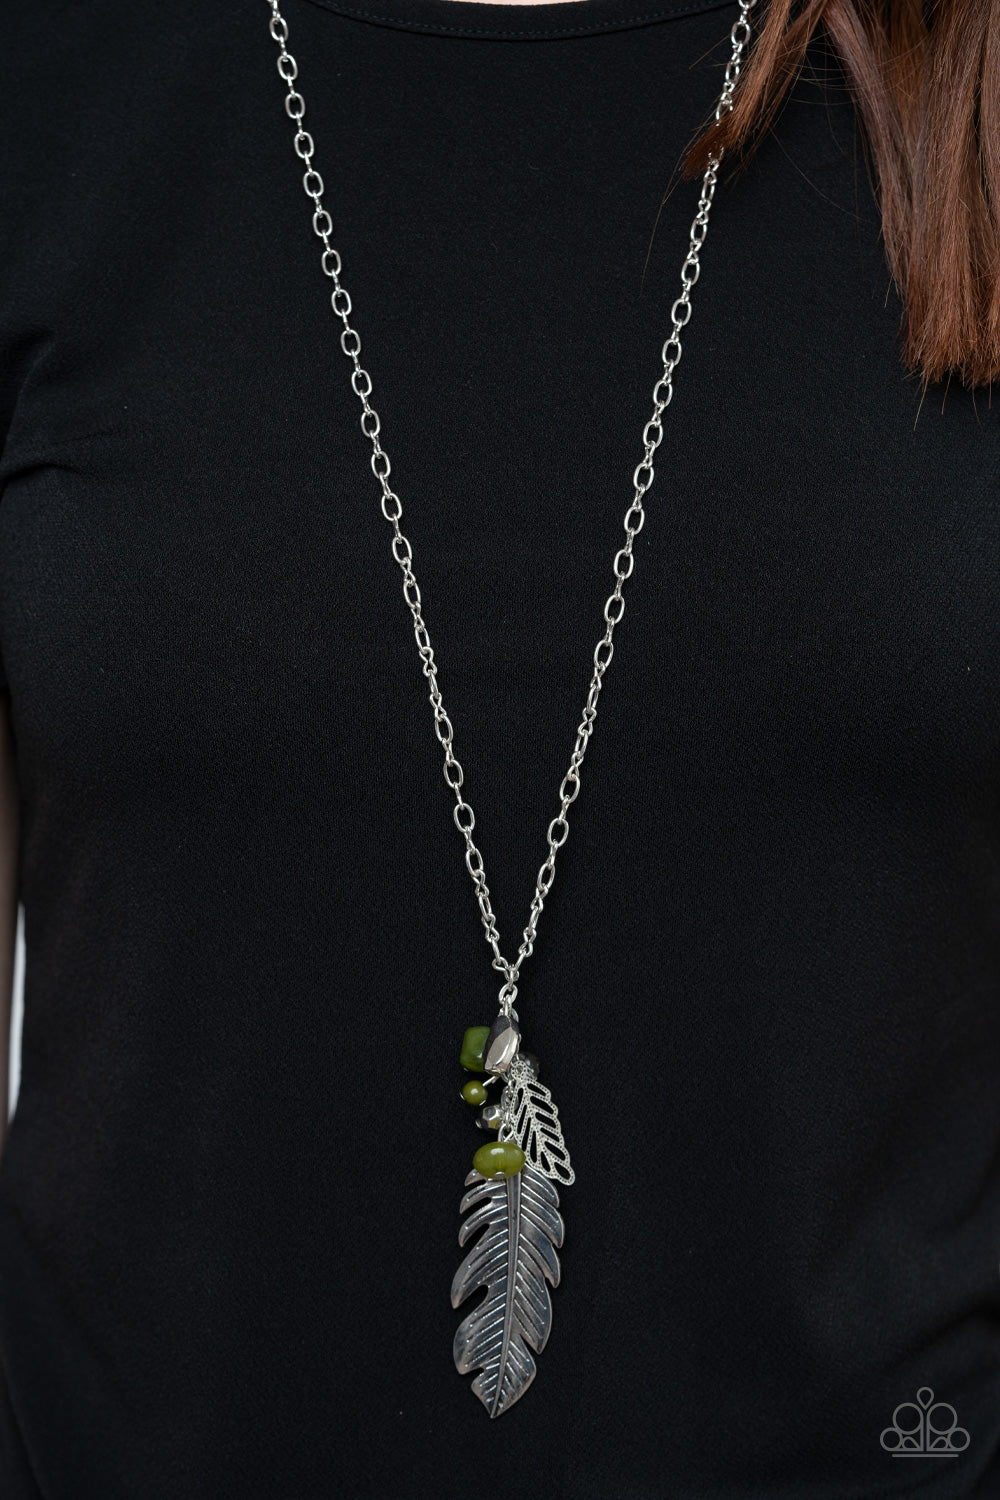 Feather Flair Necklace - Green